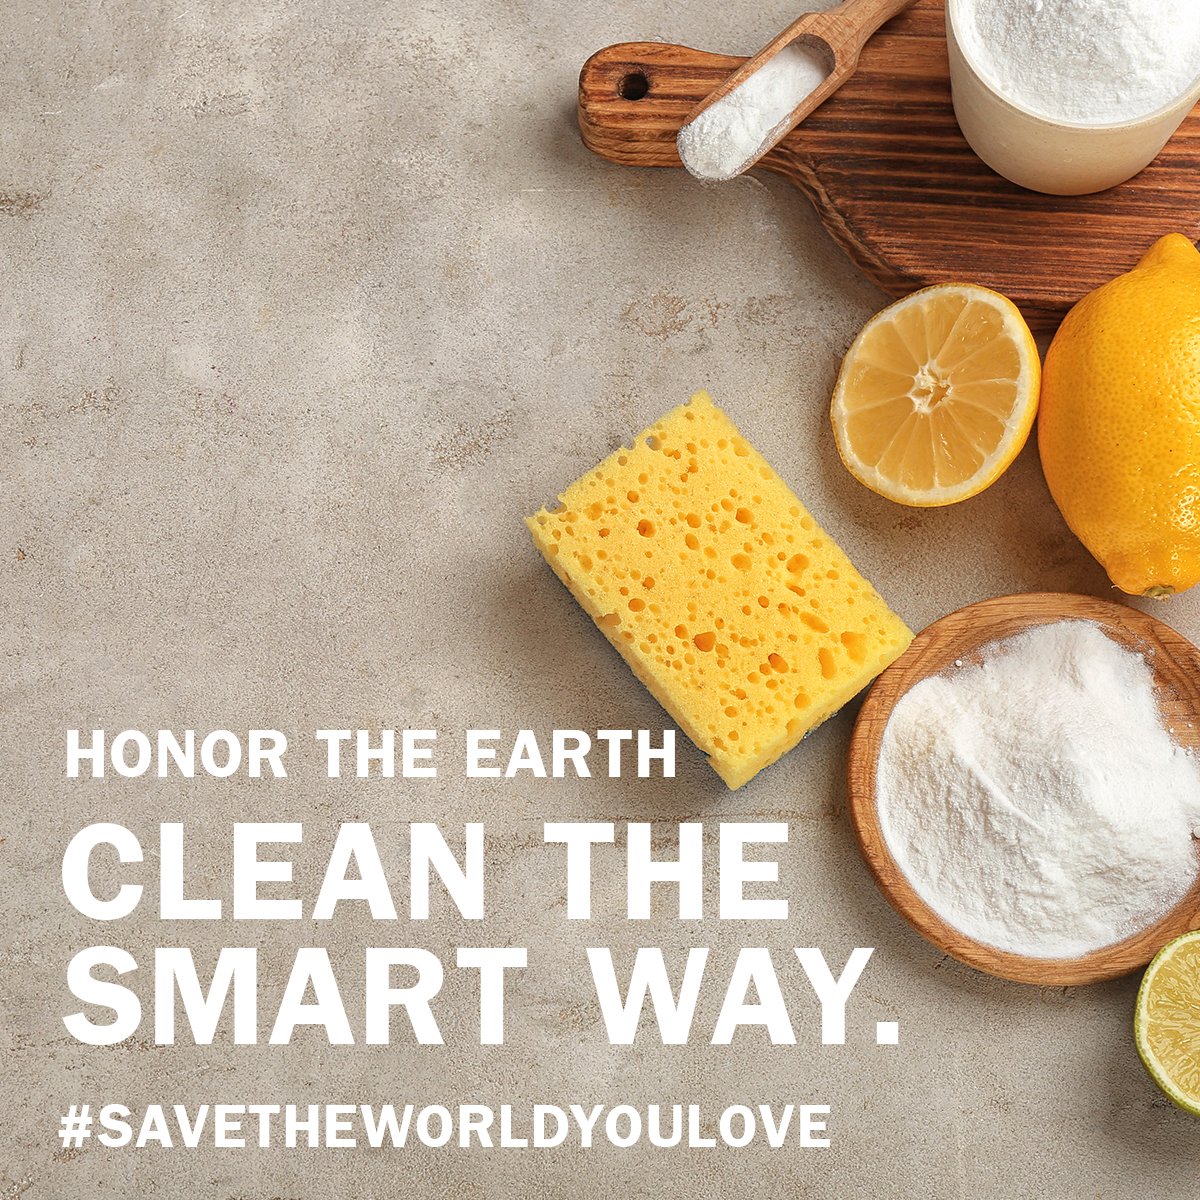 #HonorTheEarth by minimizing the environmental impact when cleaning your boat. Learn how here dbw.parks.ca.gov/?page_id=29203 #EarthWeek #SaveTheWorldYouLove @TheCACoast